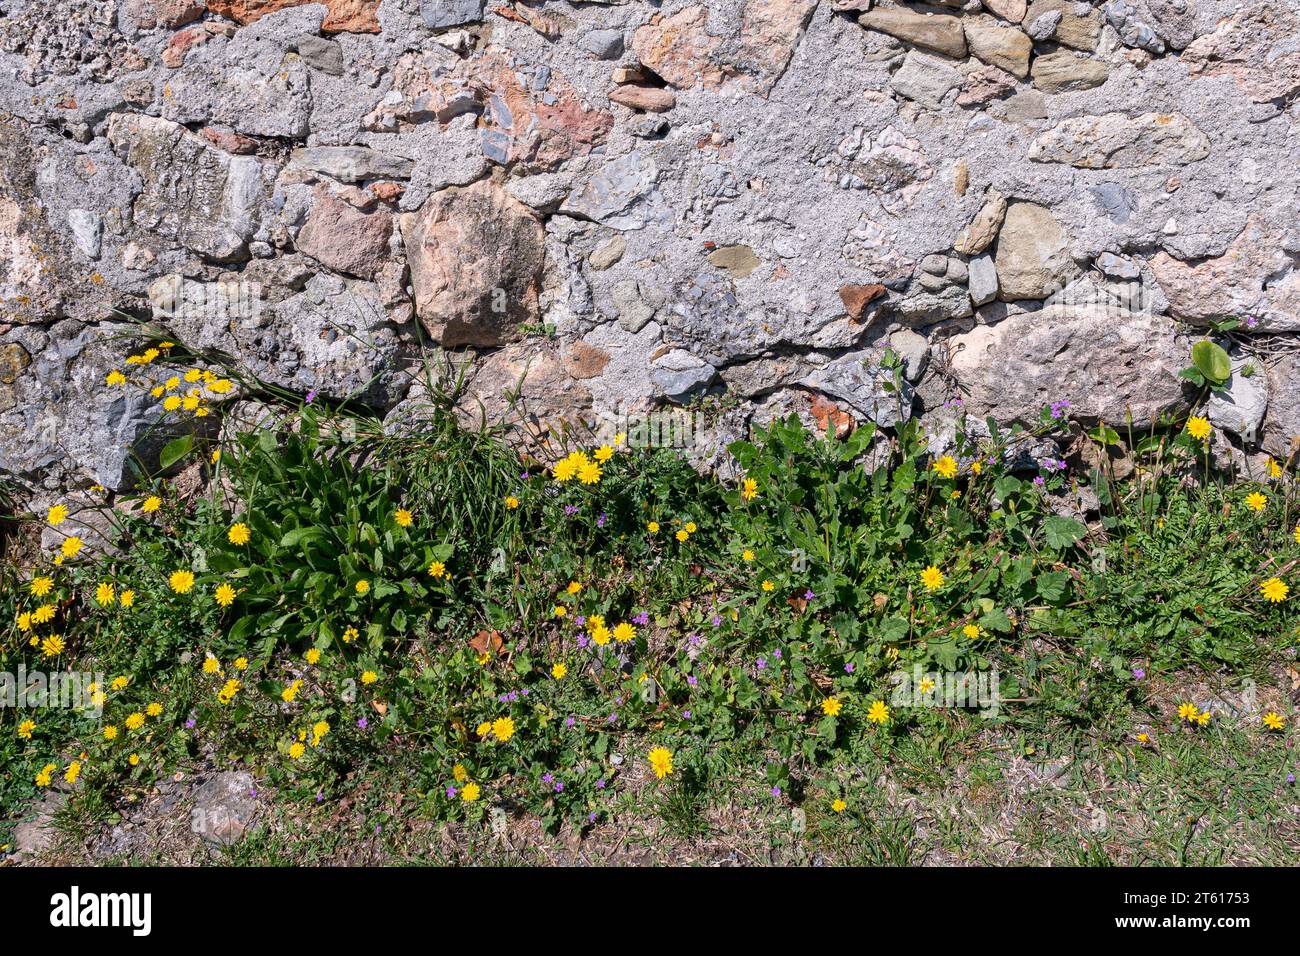 Wild plants of milk thistle (Sonchus oleraceus) with yellow flowers and Mediterranean stork's bill (Erodium malacoides) with tiny pink flowers, Italy Stock Photo